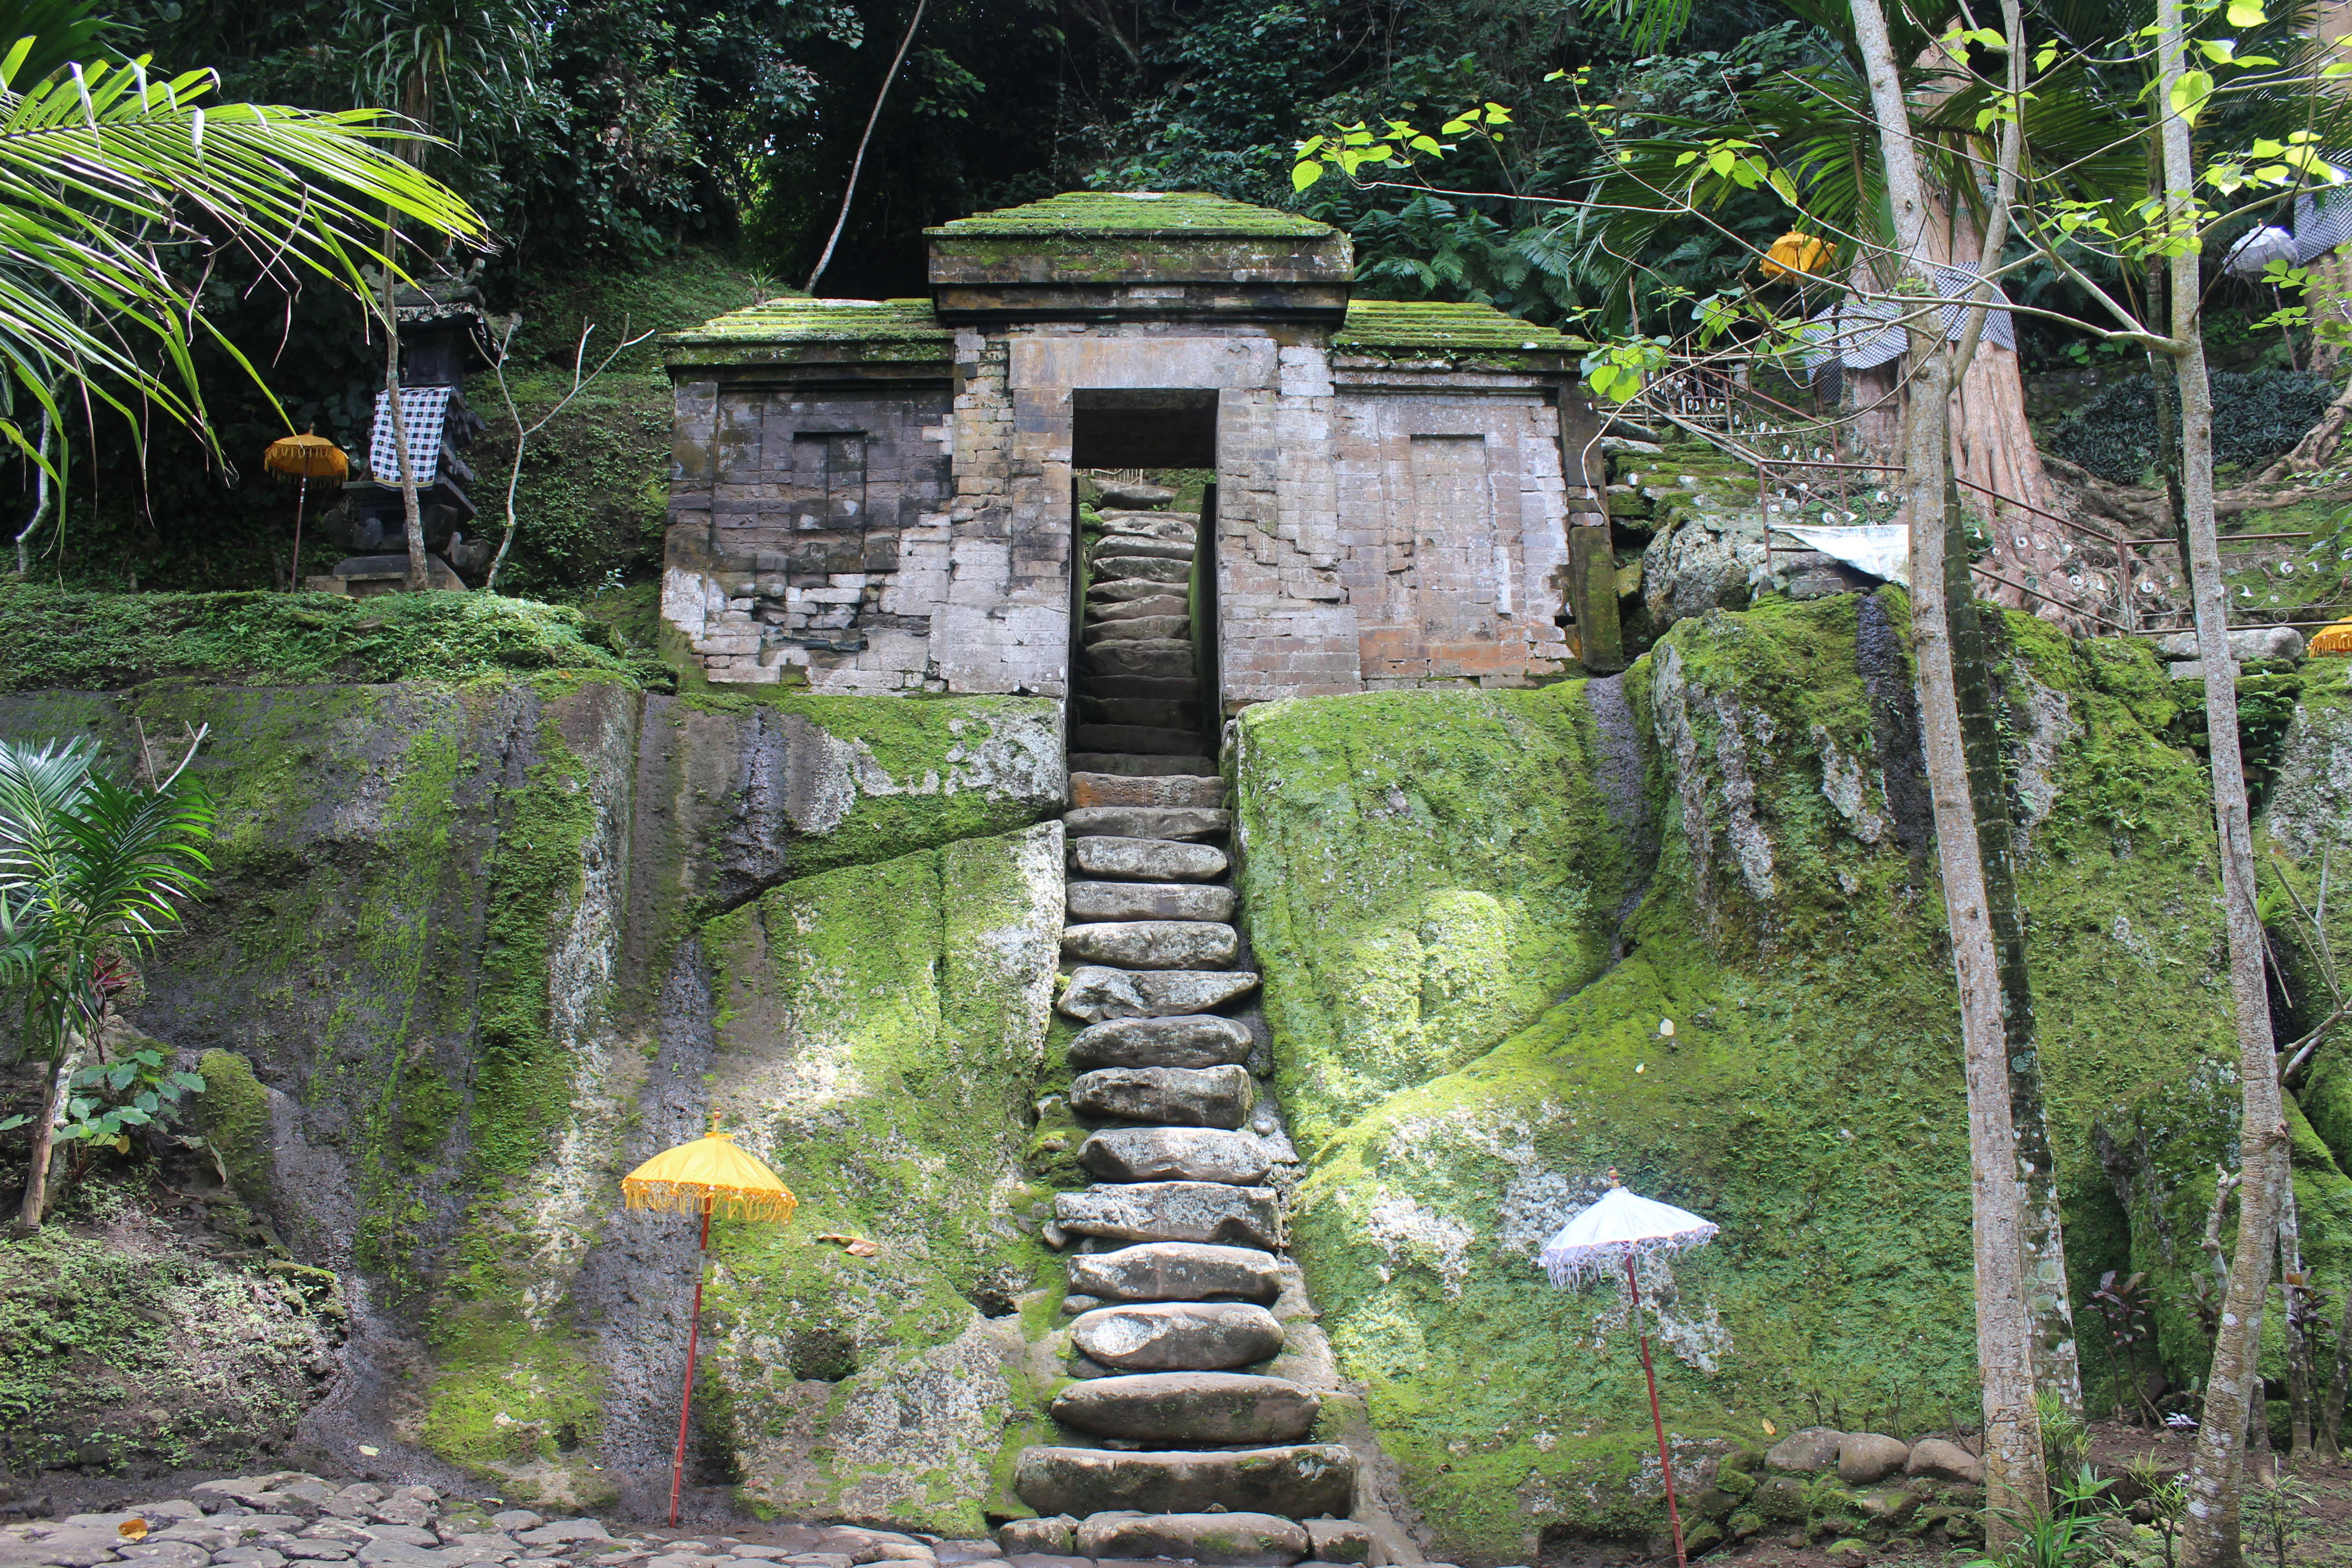 In the jungle, a flight of rock-cut stairs leading up to a gate and shrine complex, with yellow and white umbrellas